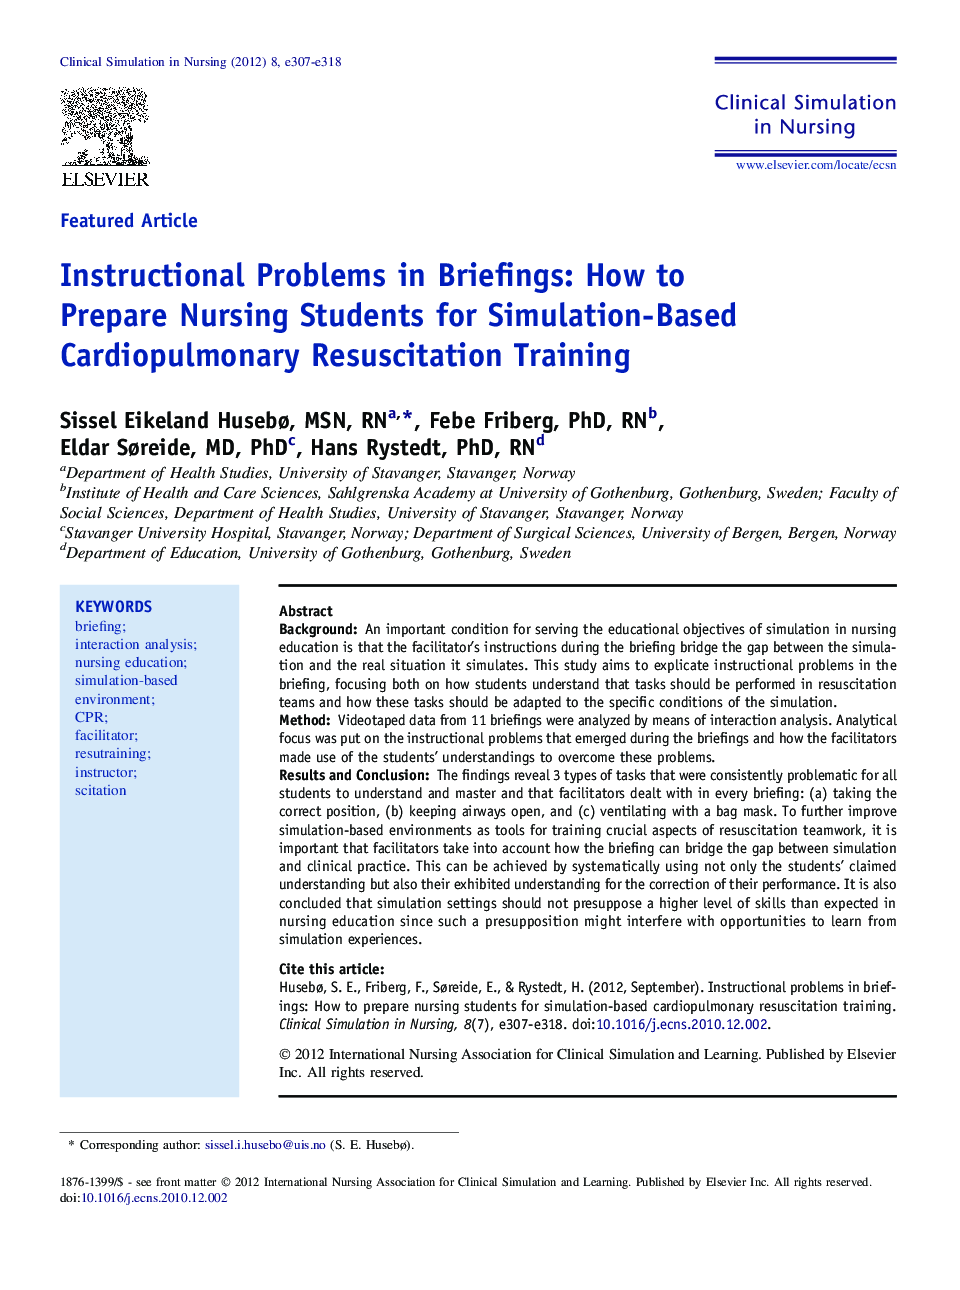 Instructional Problems in Briefings: How to Prepare Nursing Students for Simulation-Based Cardiopulmonary Resuscitation Training